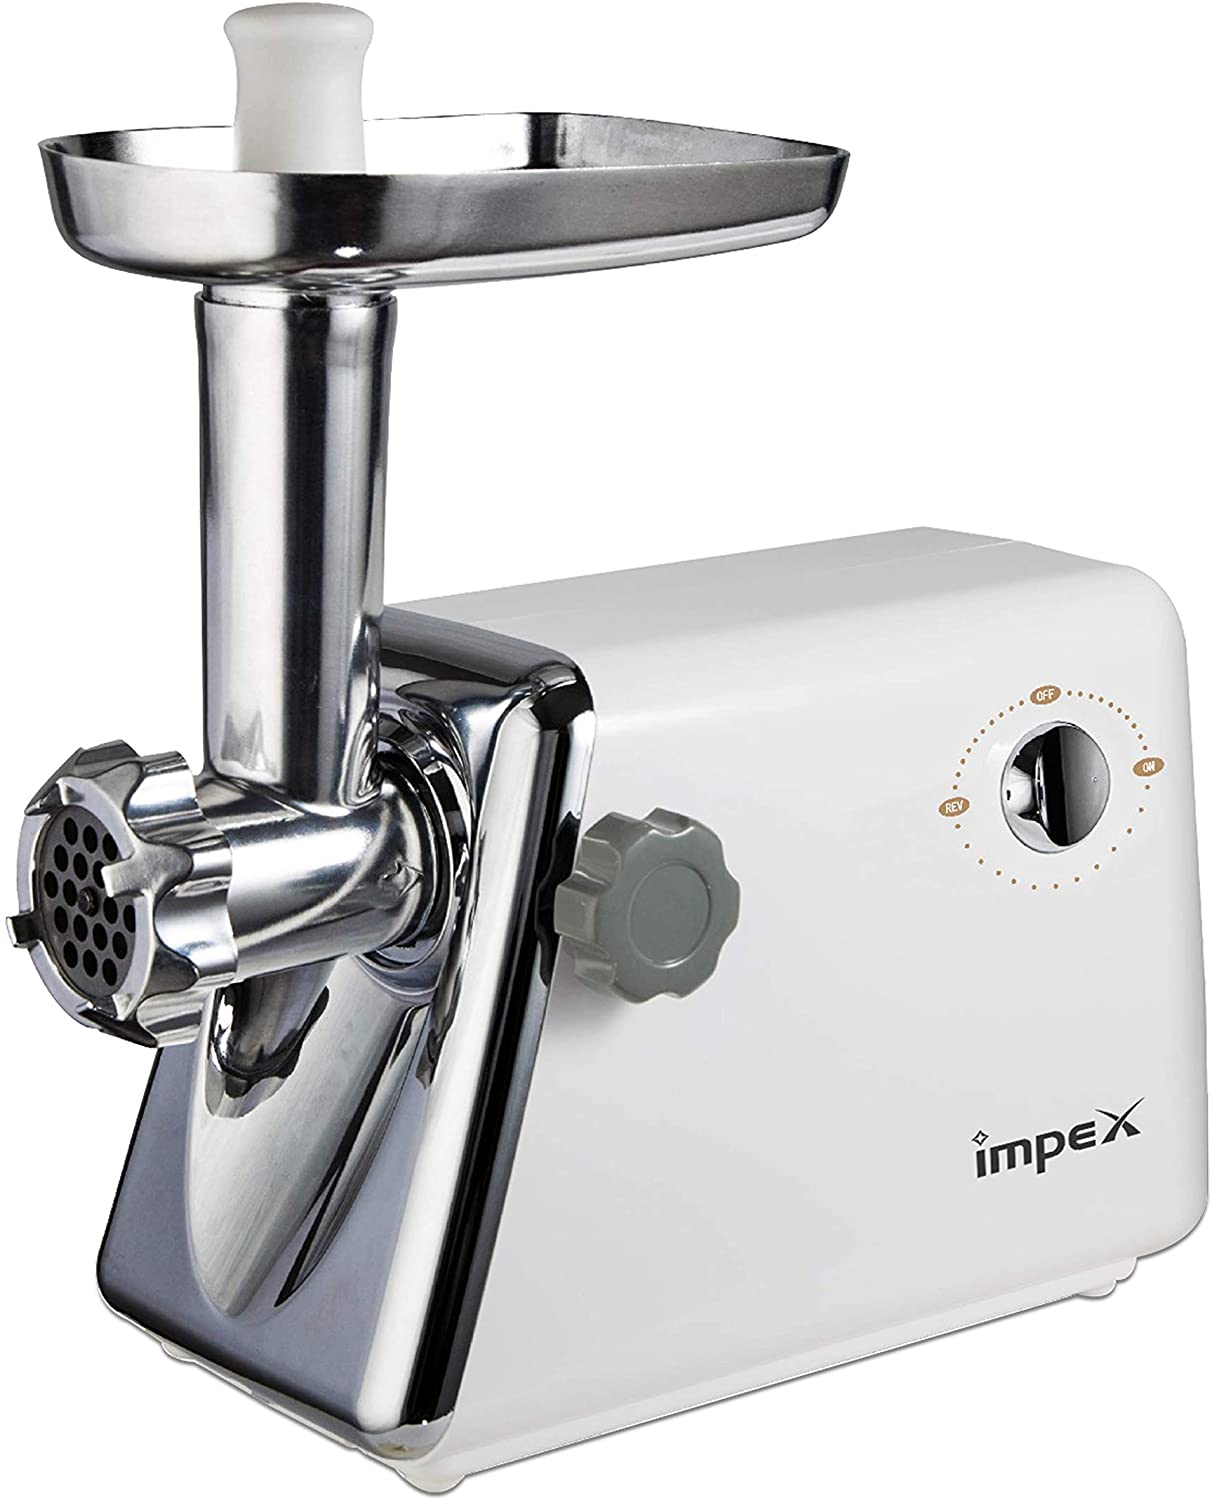 Impex MG 3801 1800W Meat Grinder with Sausage Stuffer, Keema Maker, Stainless Steel Blade, 2 Cutting plates 2 Years Warranty, White